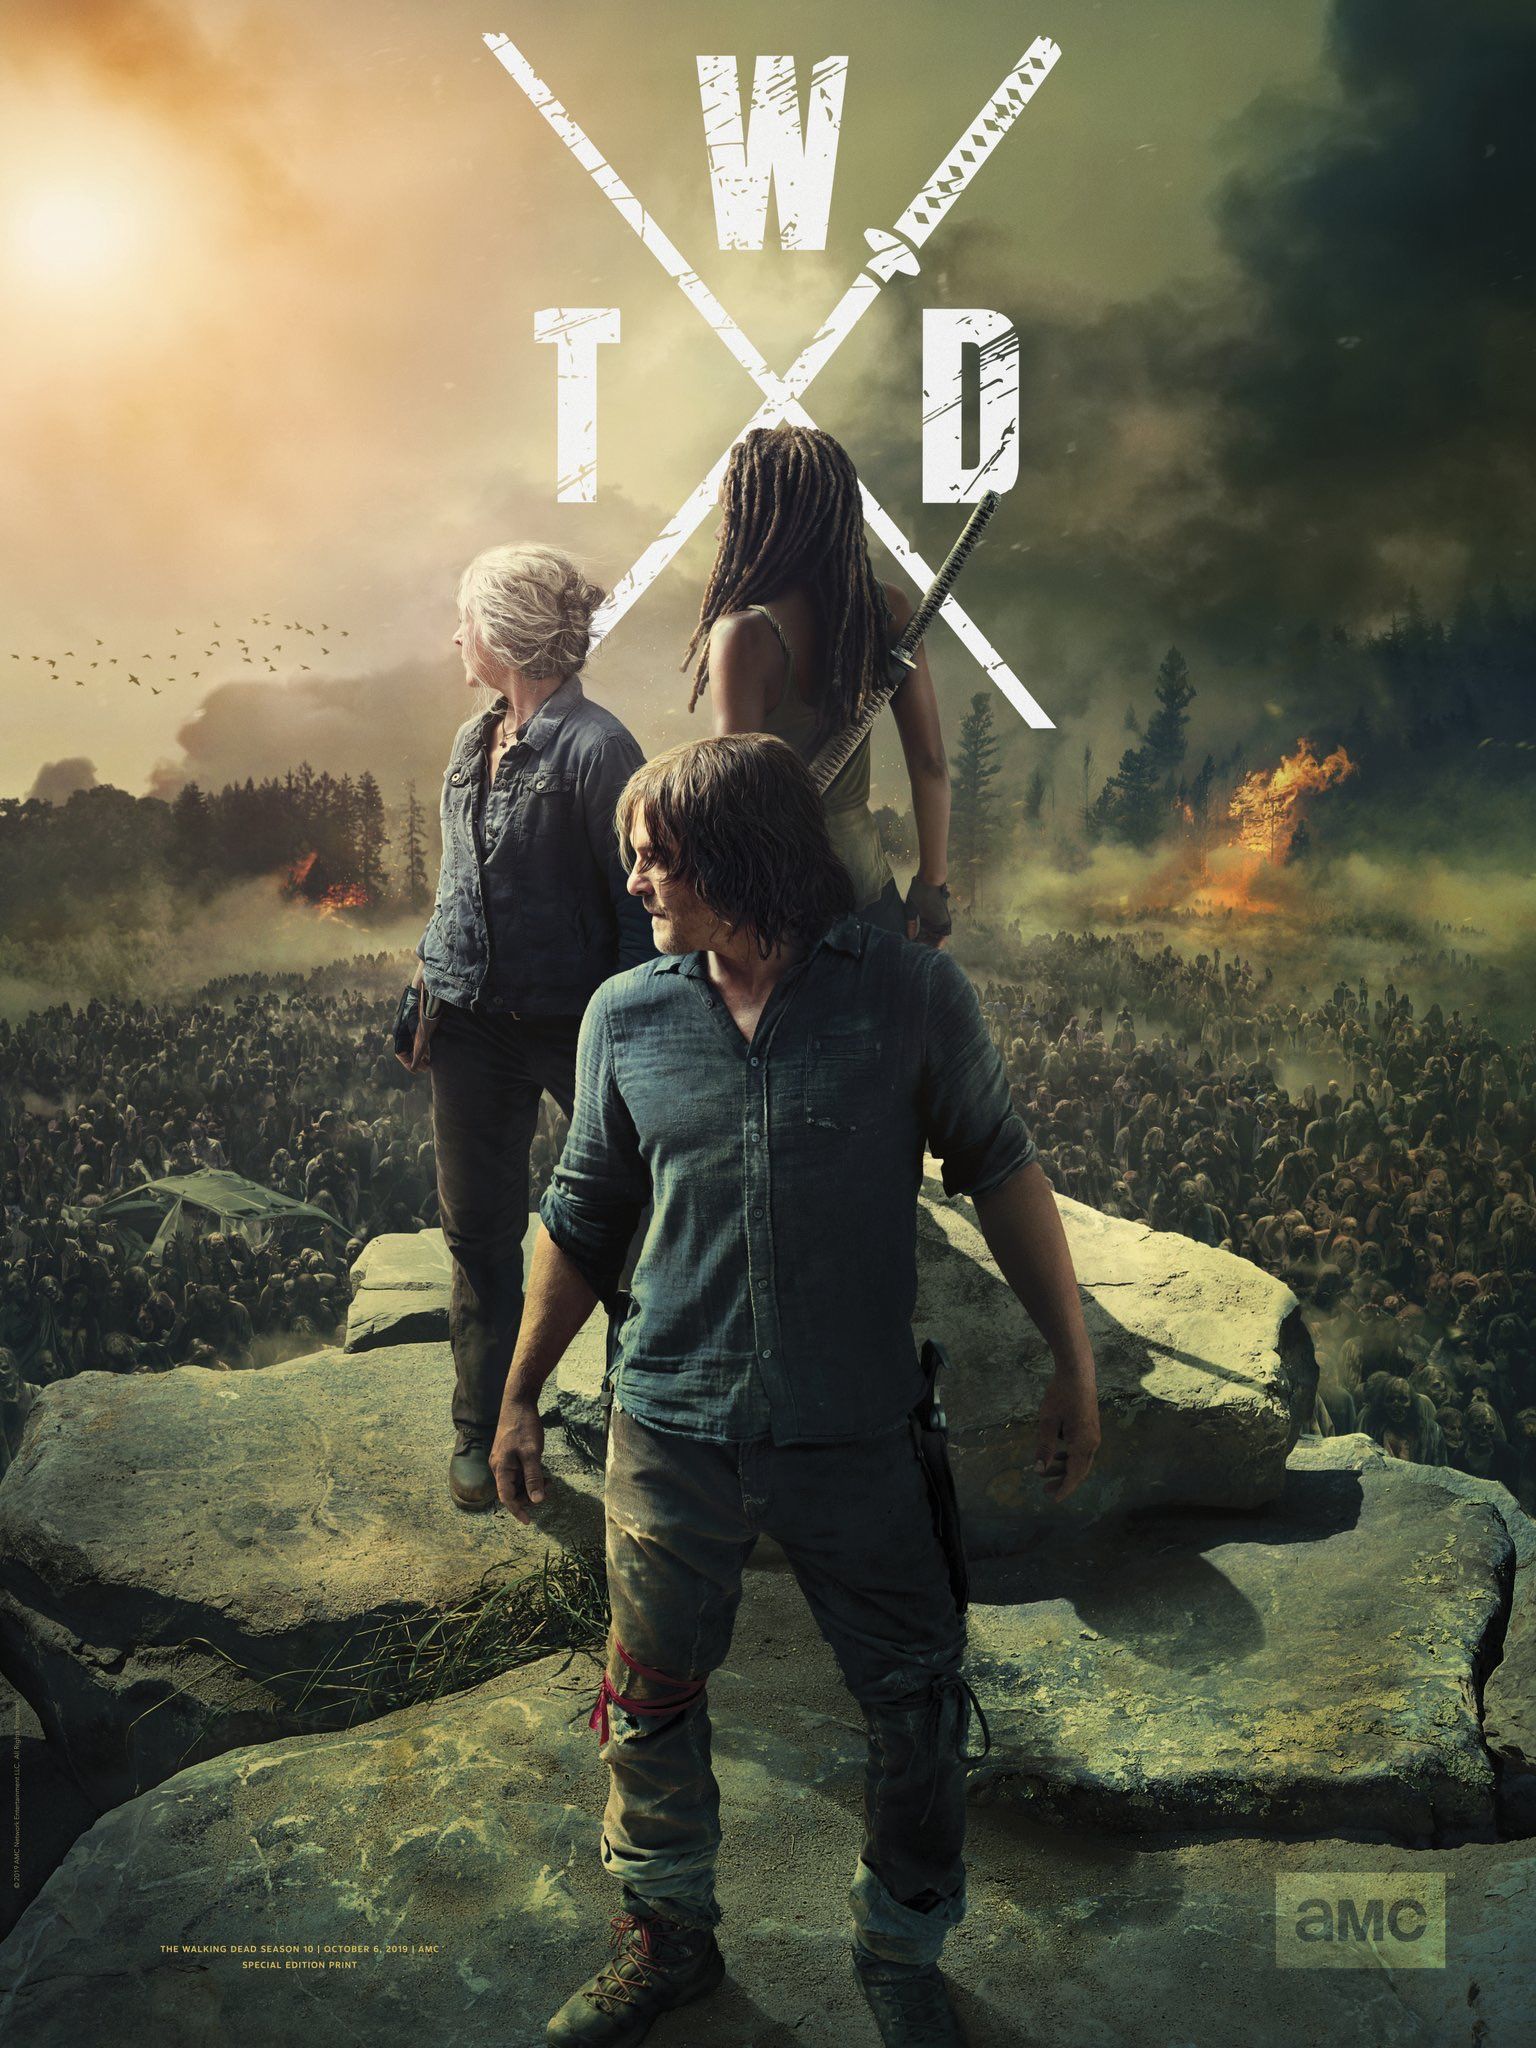 Download The walking dead season 1-10 in english with subtitles 480p 720p